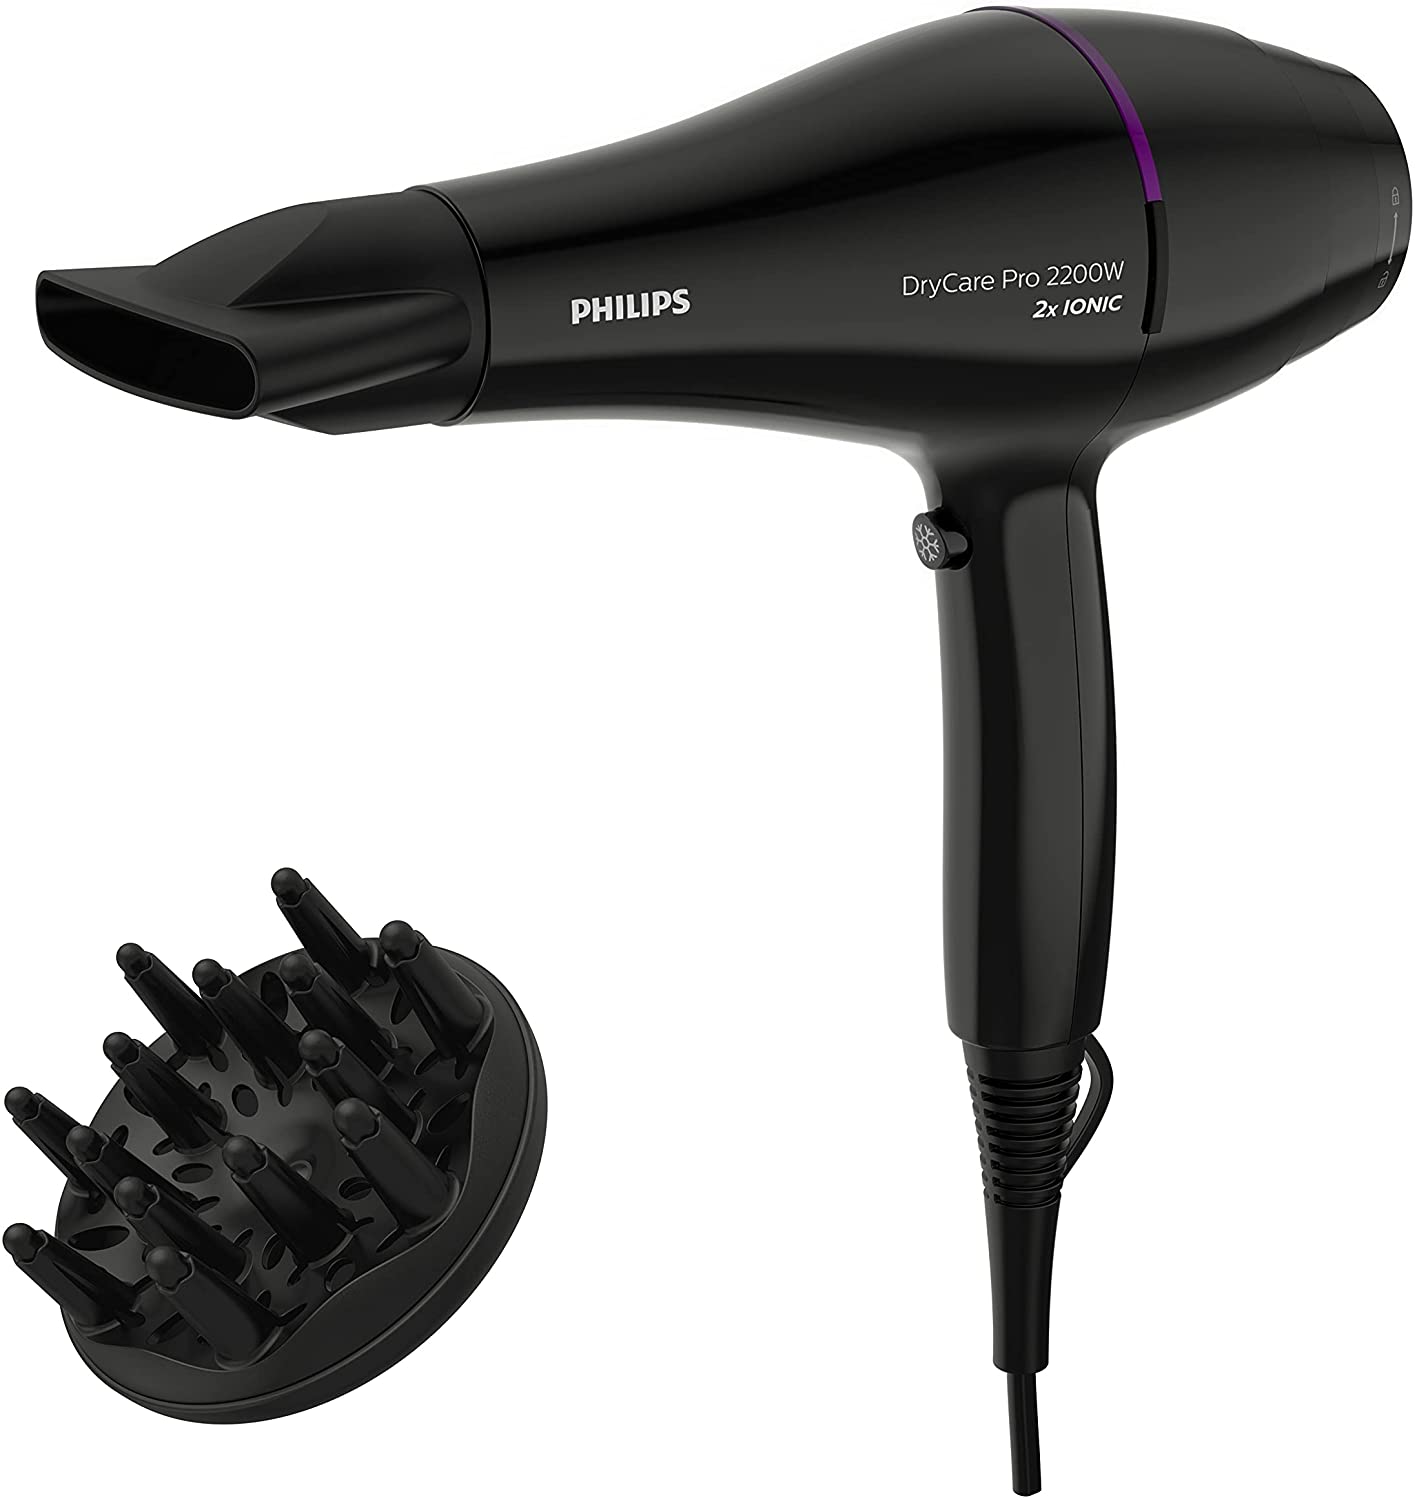 Philips Drycare Pro Hairdryer - Bhd27403, Black